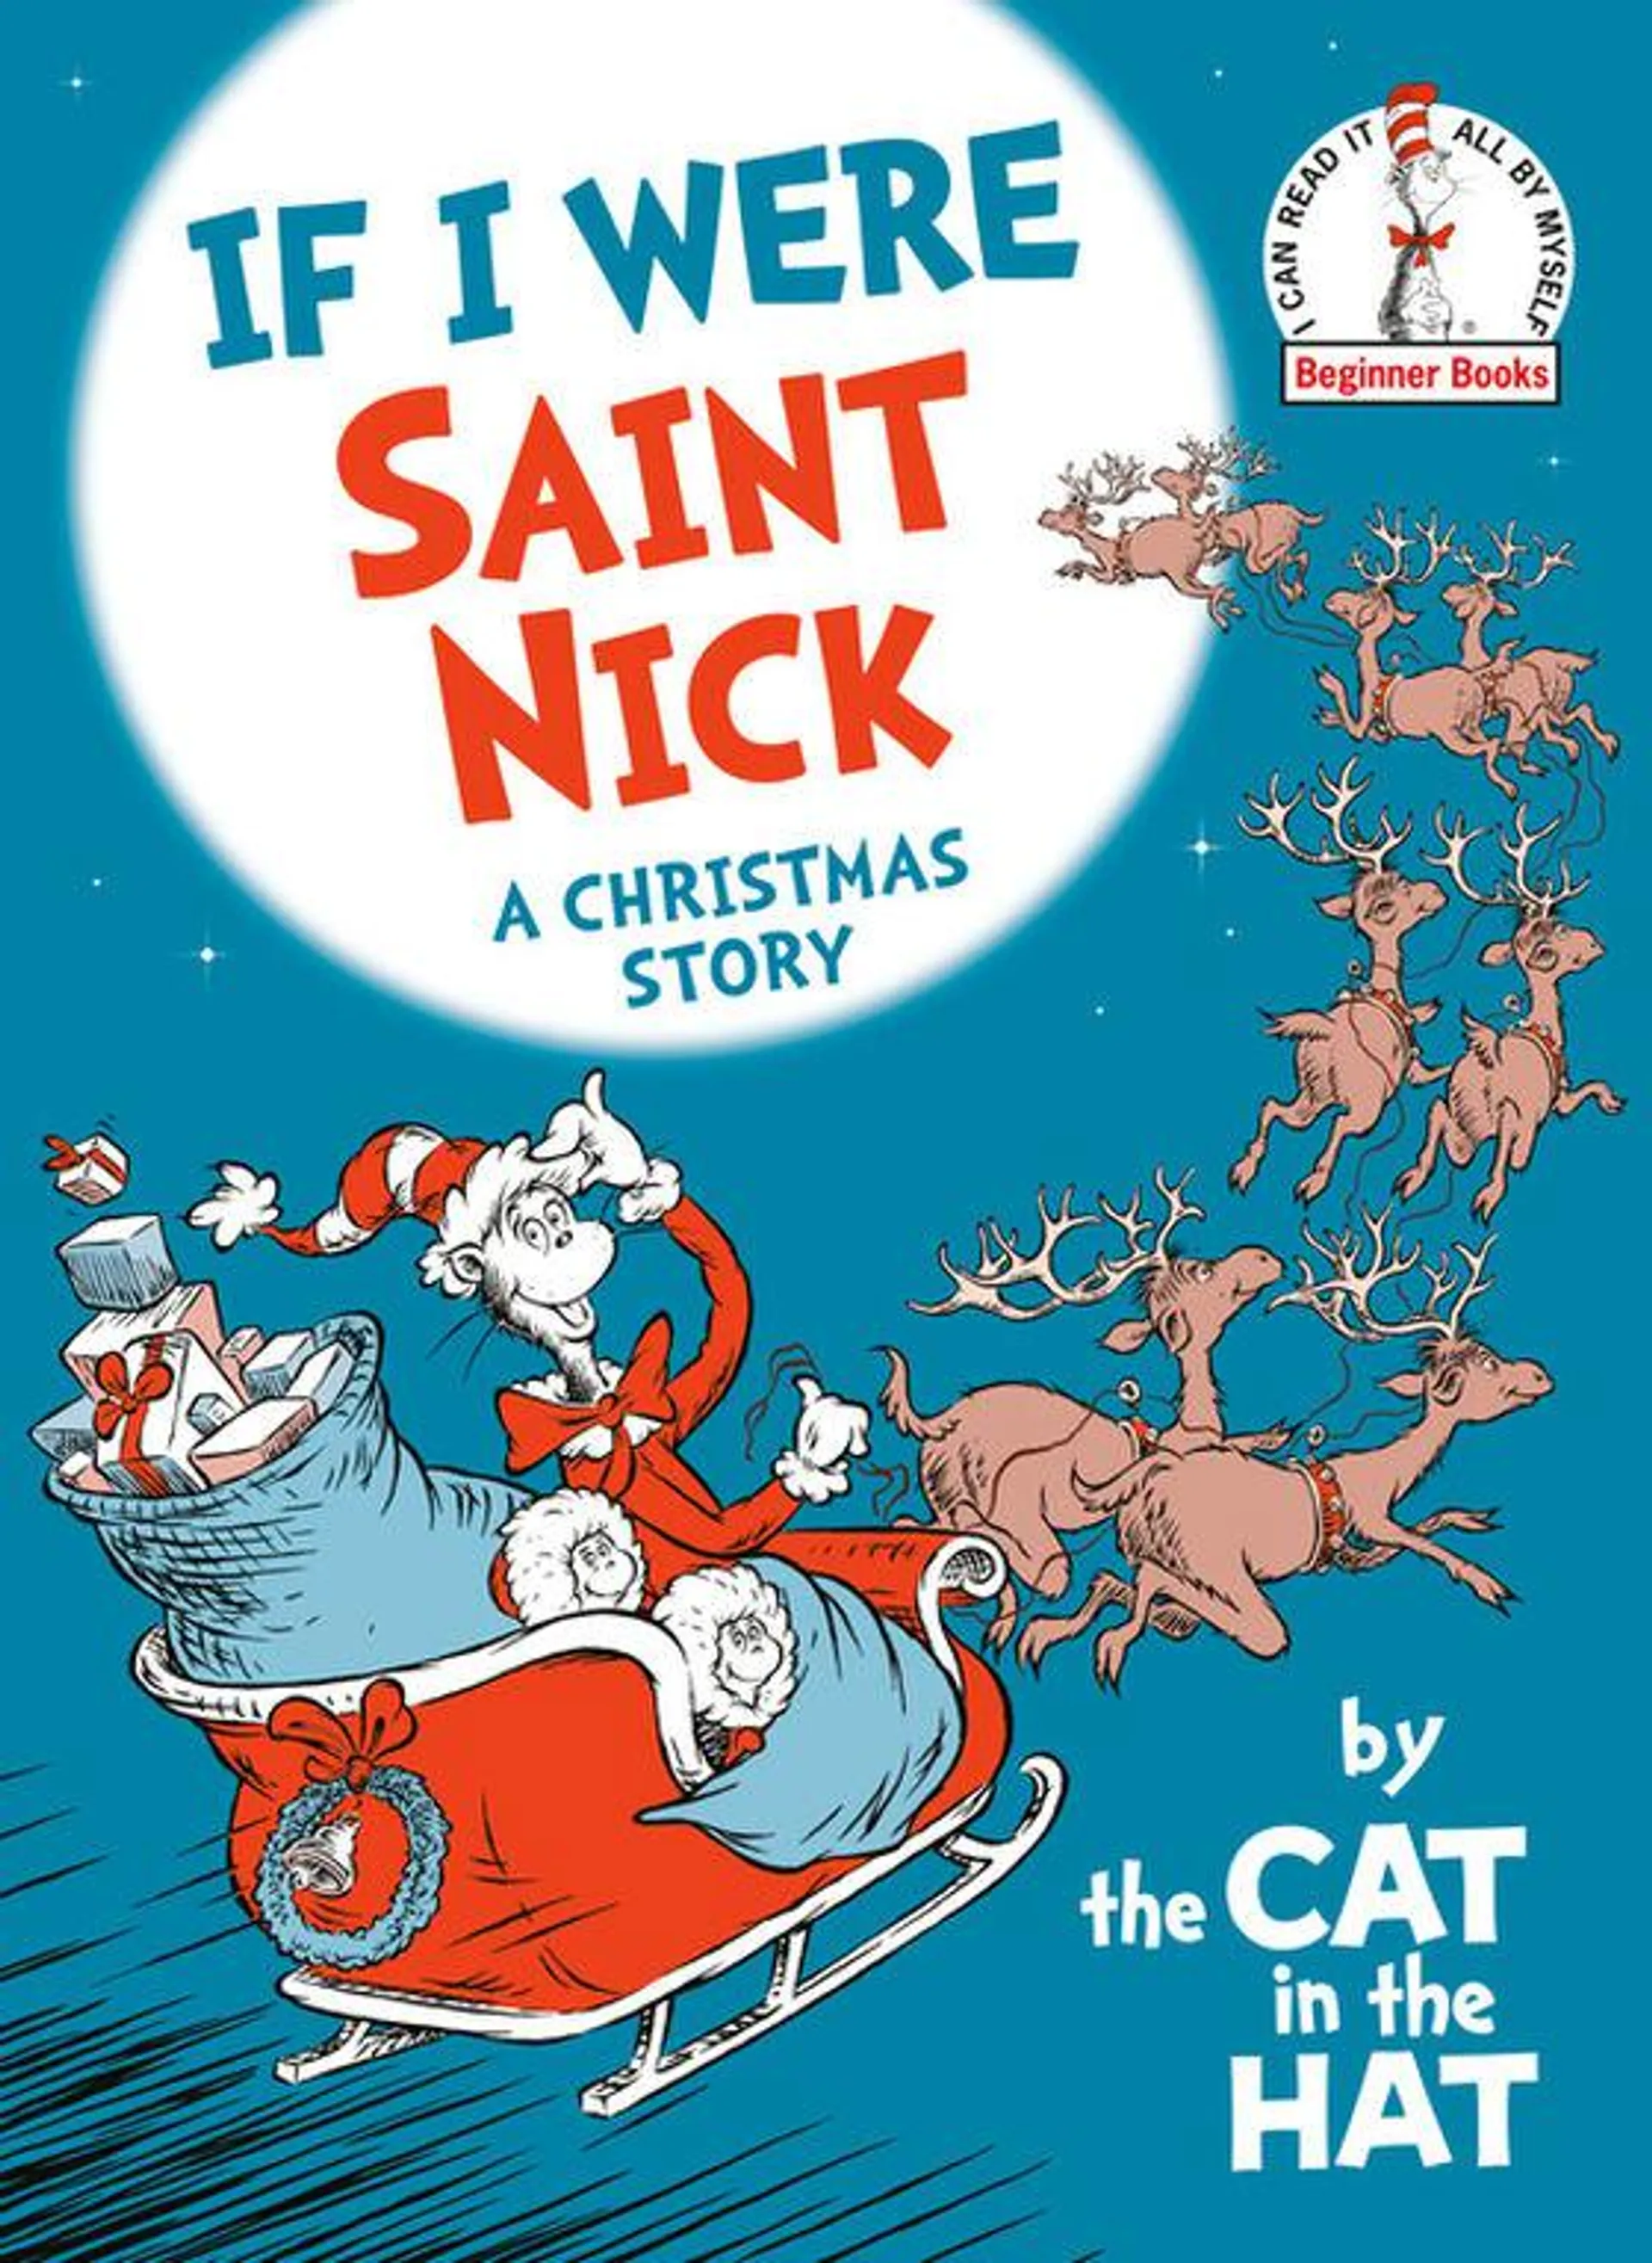 If I Were Saint Nick - by the Cat in the Hat - English Edition